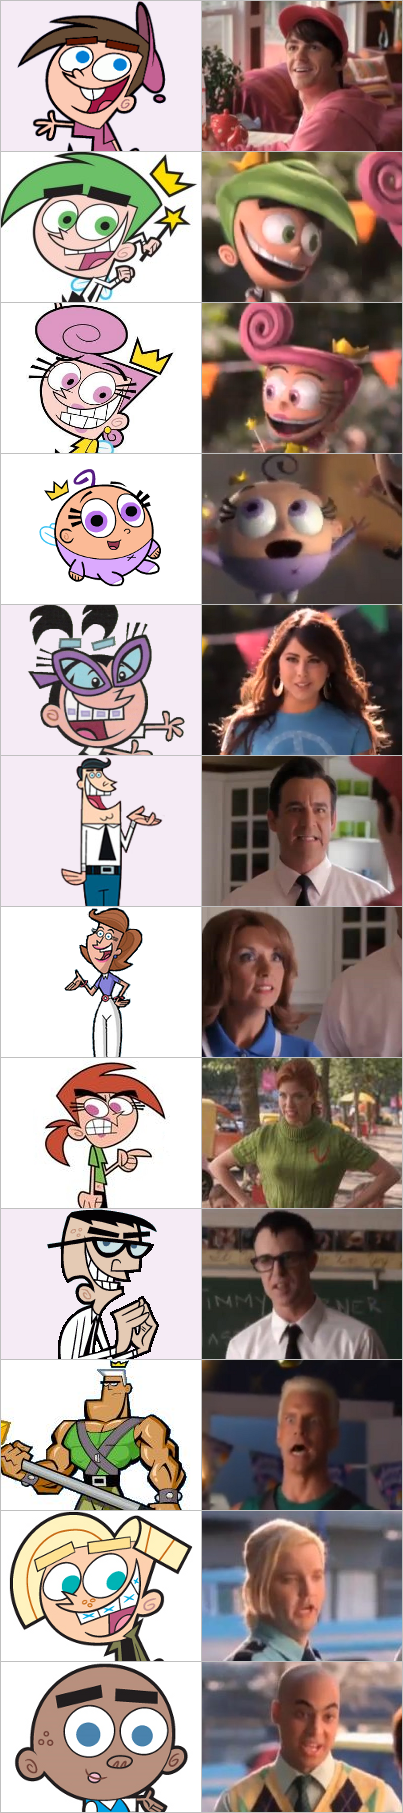 Grown Timmy Turner Characters on Movie  Grow Up  Timmy Turner    Fairly Odd Parents Wiki   Timmy Turner